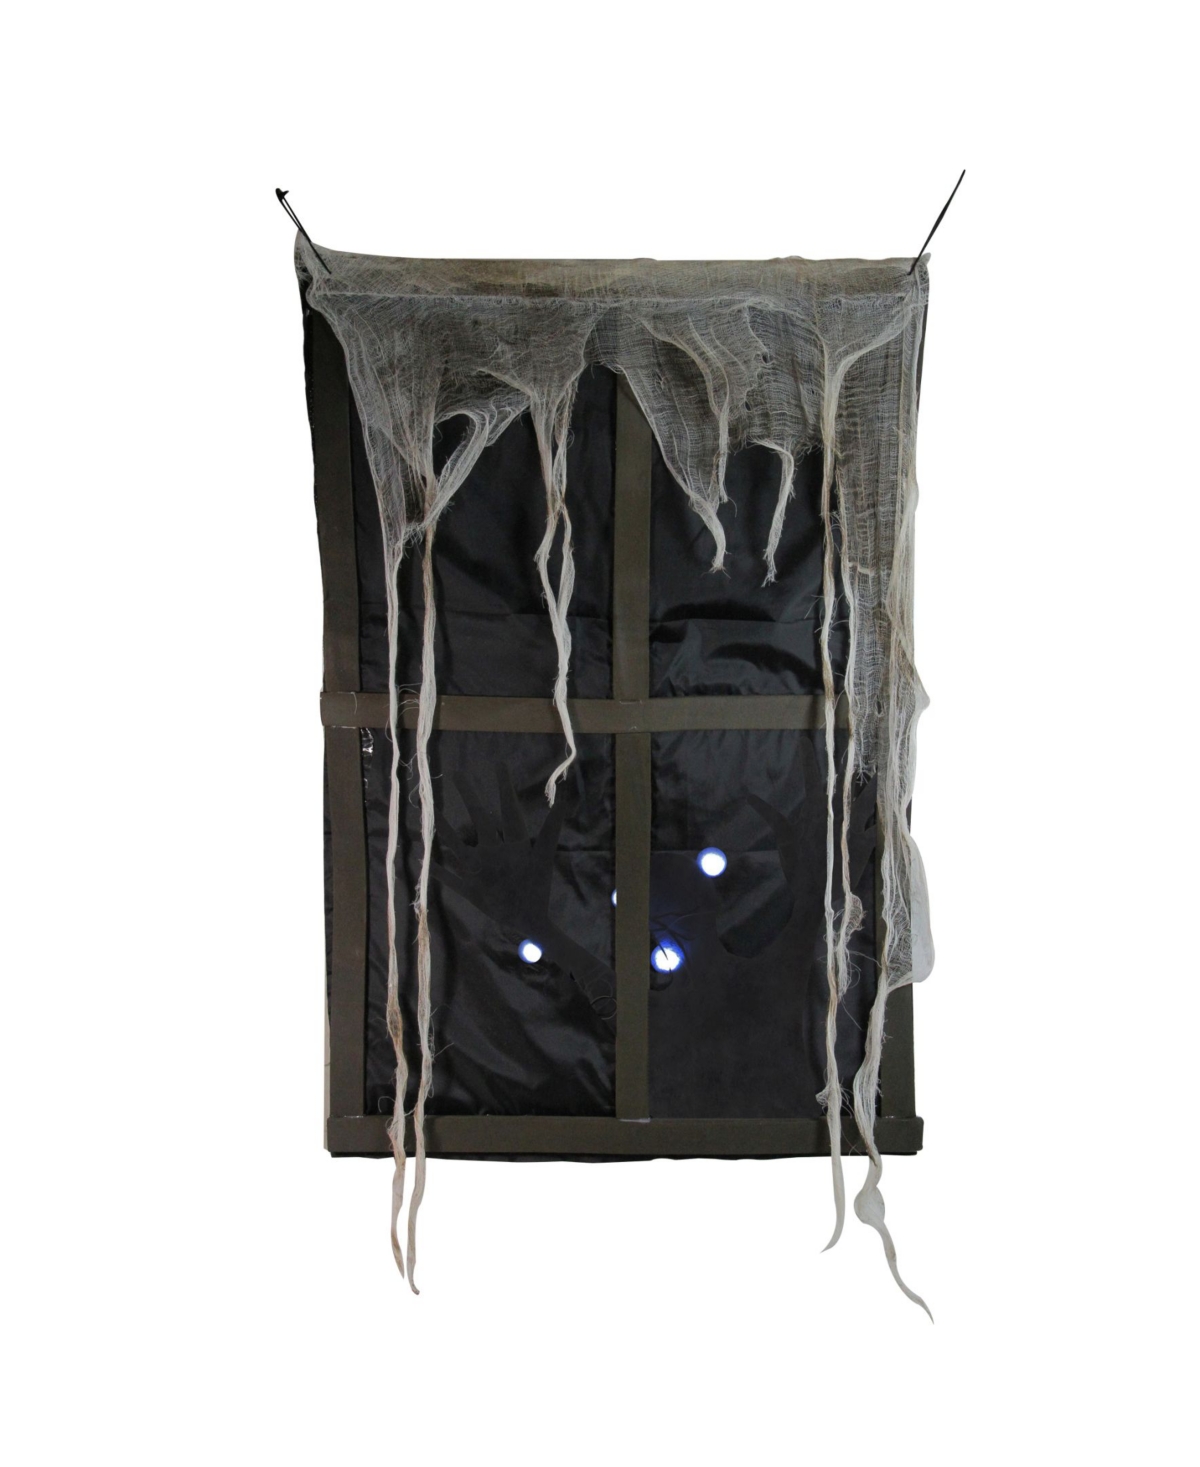 Northlight Lighted Ghostly Faux Window With Sound And Tattered Curtain Halloween Decoration In Brown